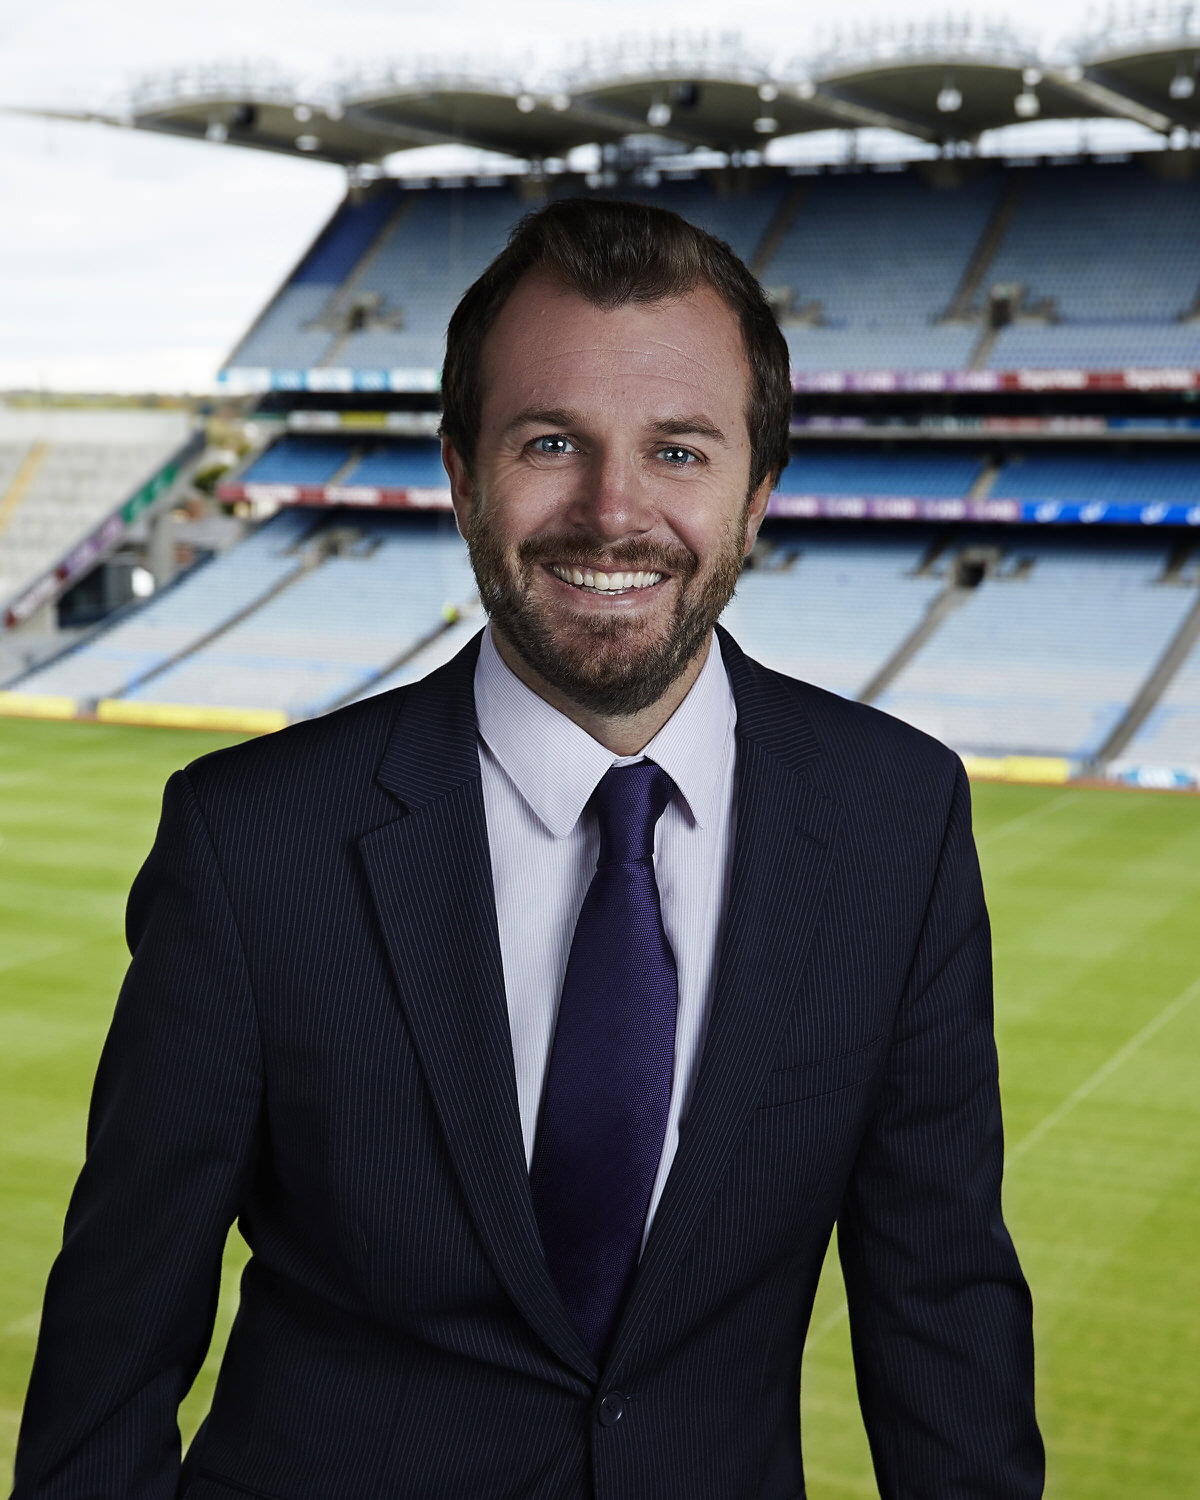  Croke Park Events and Meetings Corporate headshots by Roger Kenny 